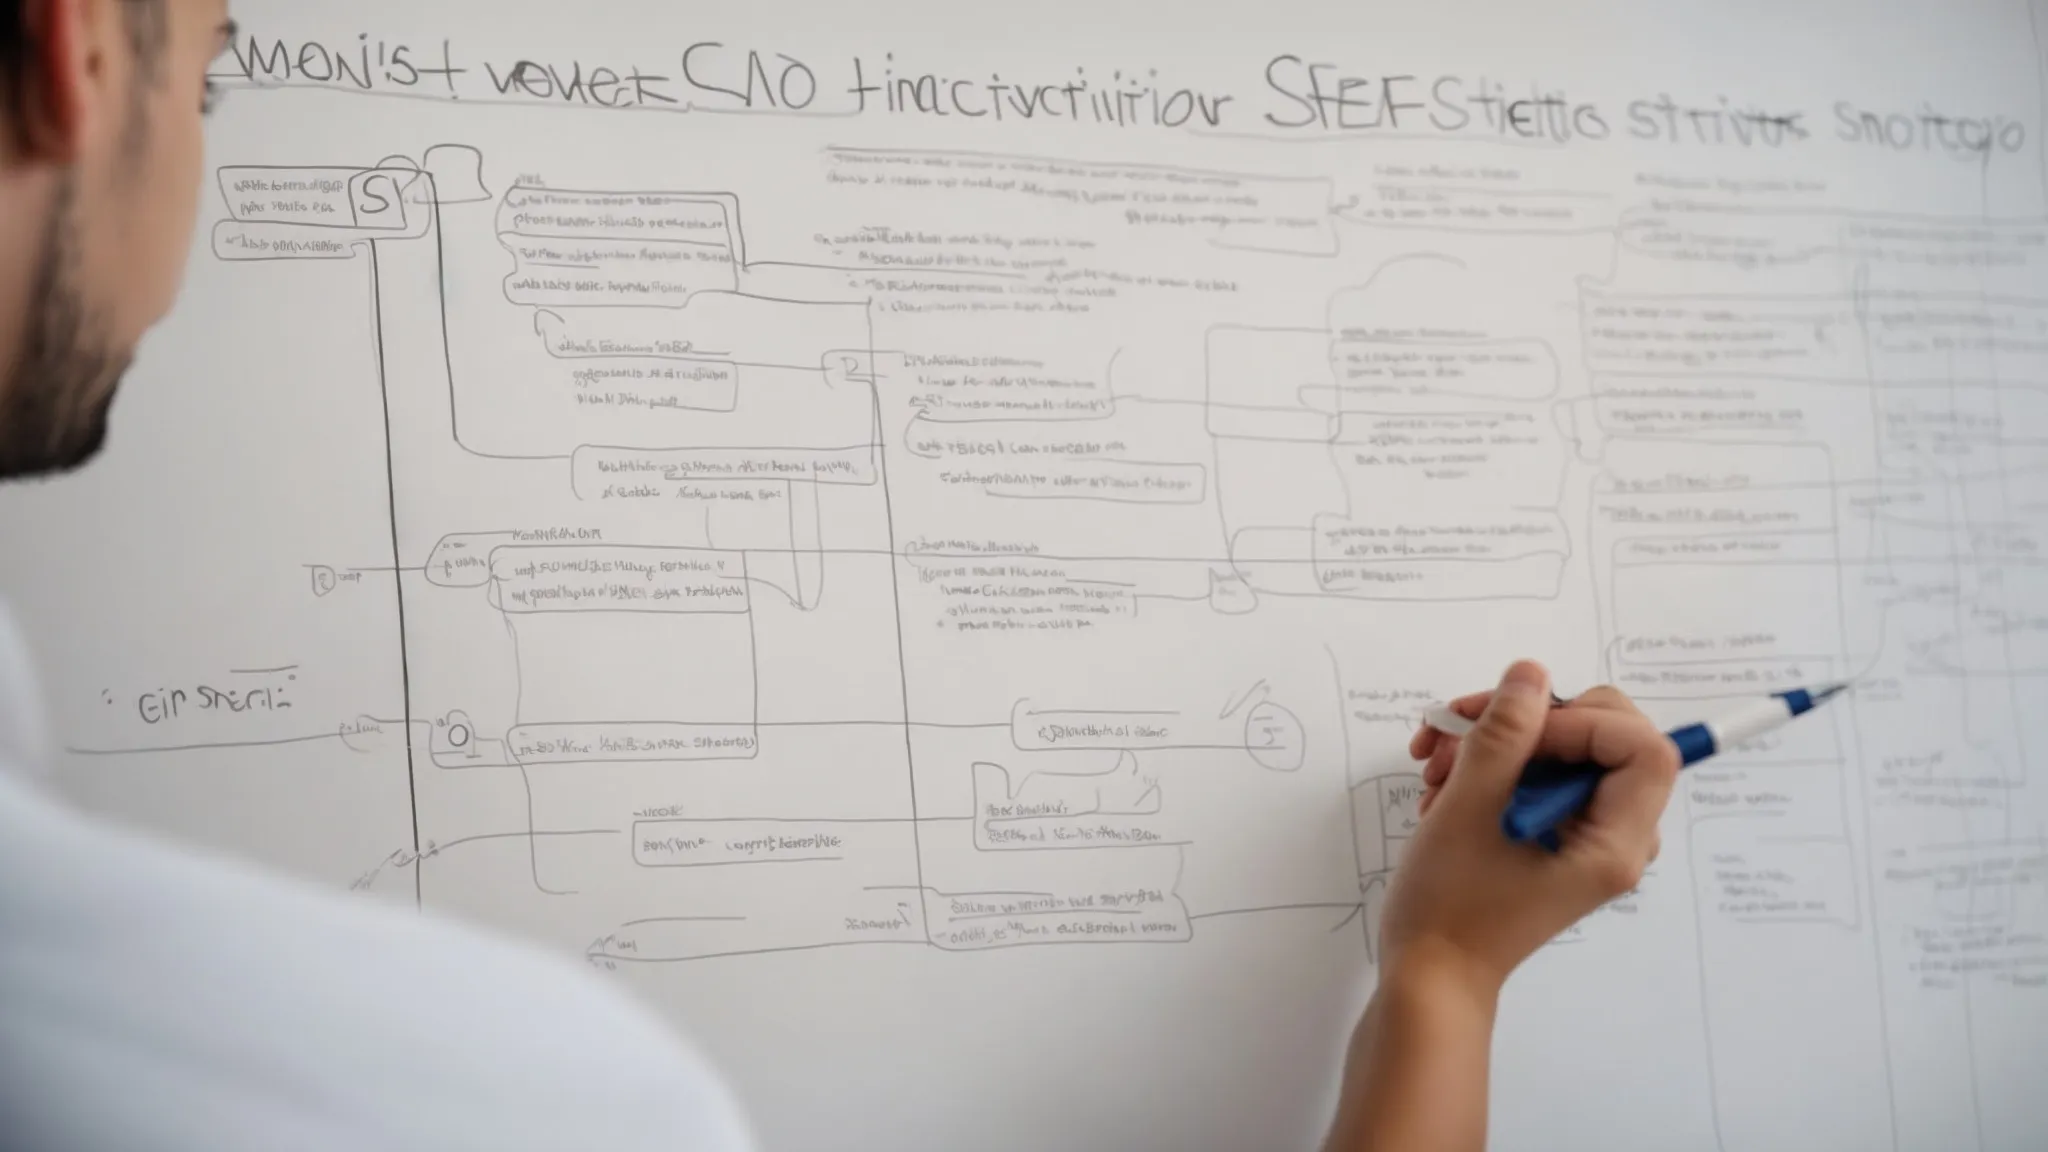 a person drawing a flowchart on a whiteboard to illustrate the steps of a tailored seo strategy for different market sectors.